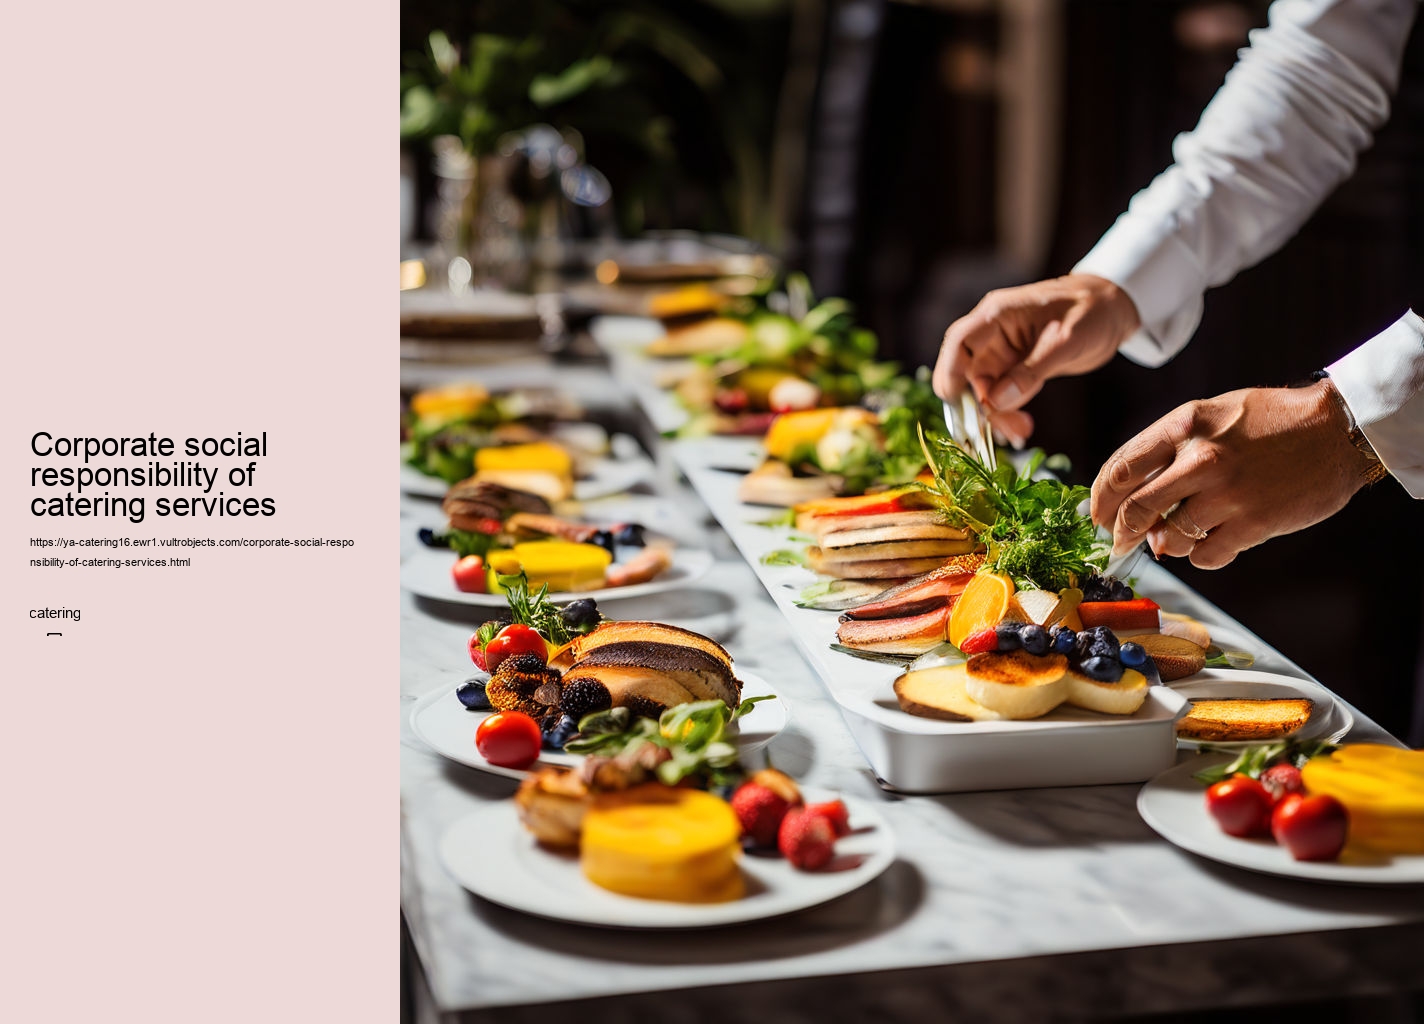 Corporate social responsibility of catering services